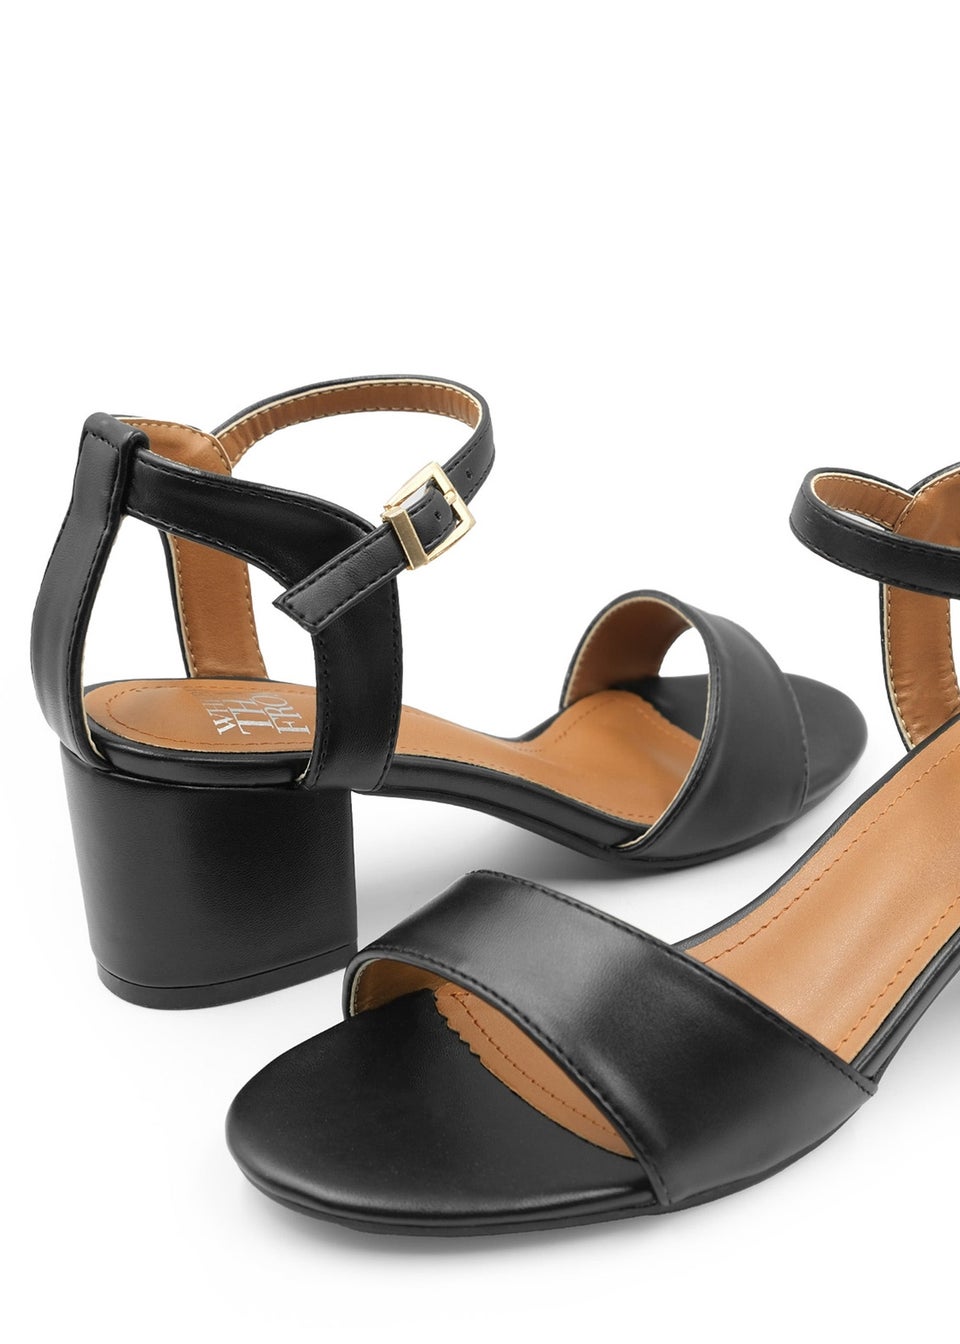 Where's That From Black Adrianna Wide Fit PU Strappy Heels